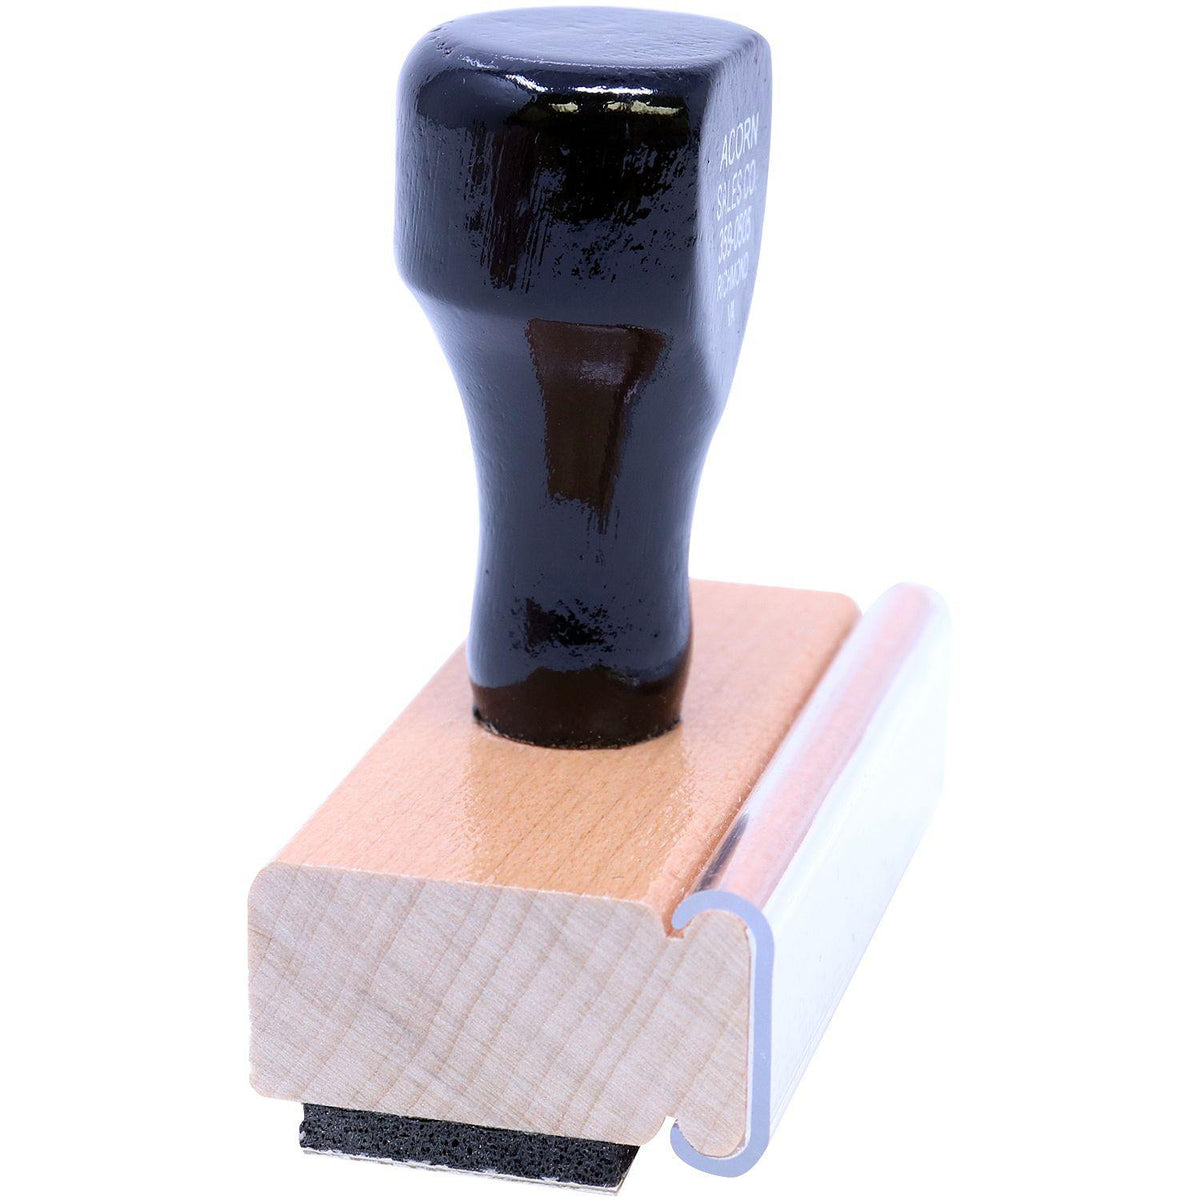 Side View of Large Petition Rubber Stamp at an Angle